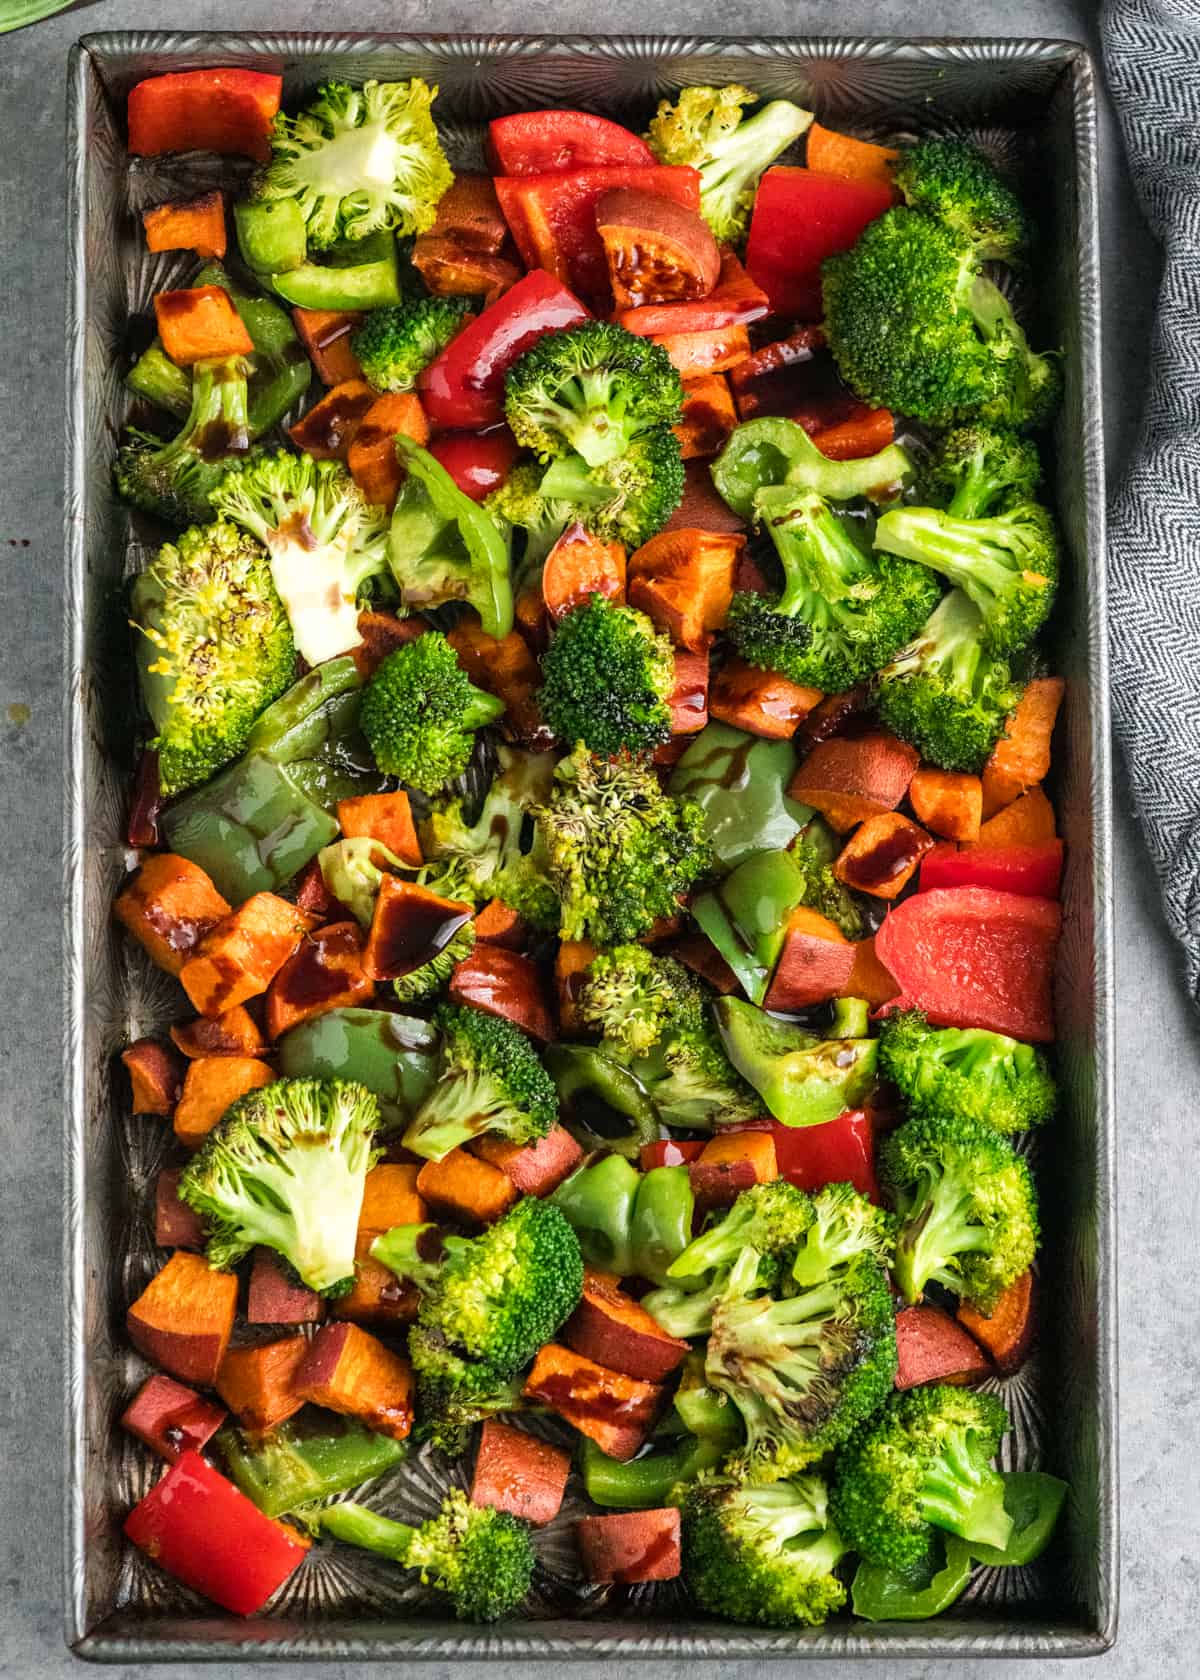 vegetables with balsamic vinegar poured on top in a baking pan